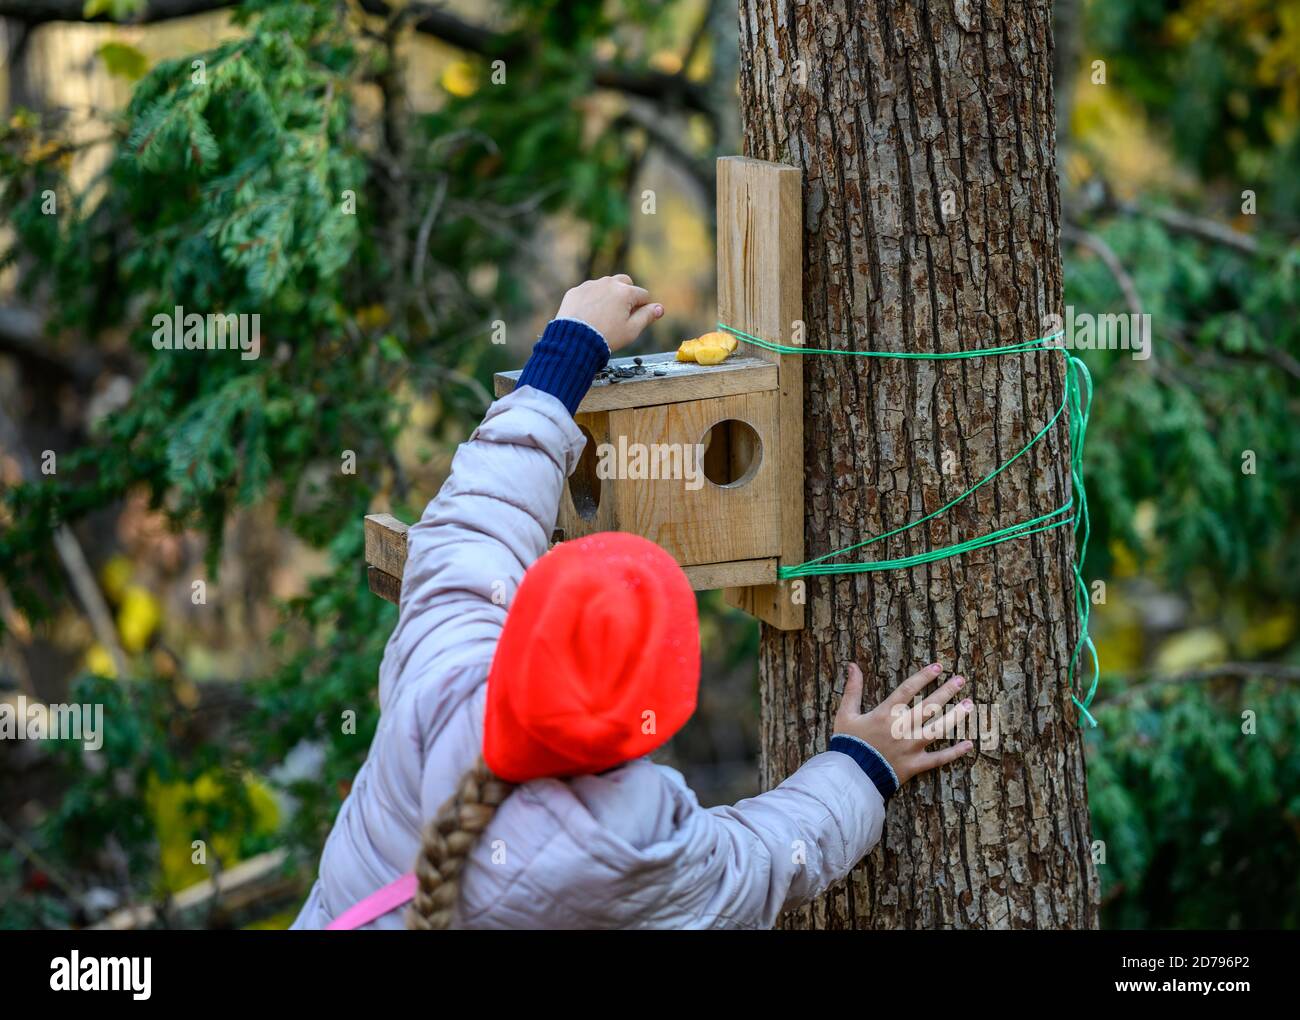 Girl pours food into the bird feeder in the autumn forest. Stock Photo